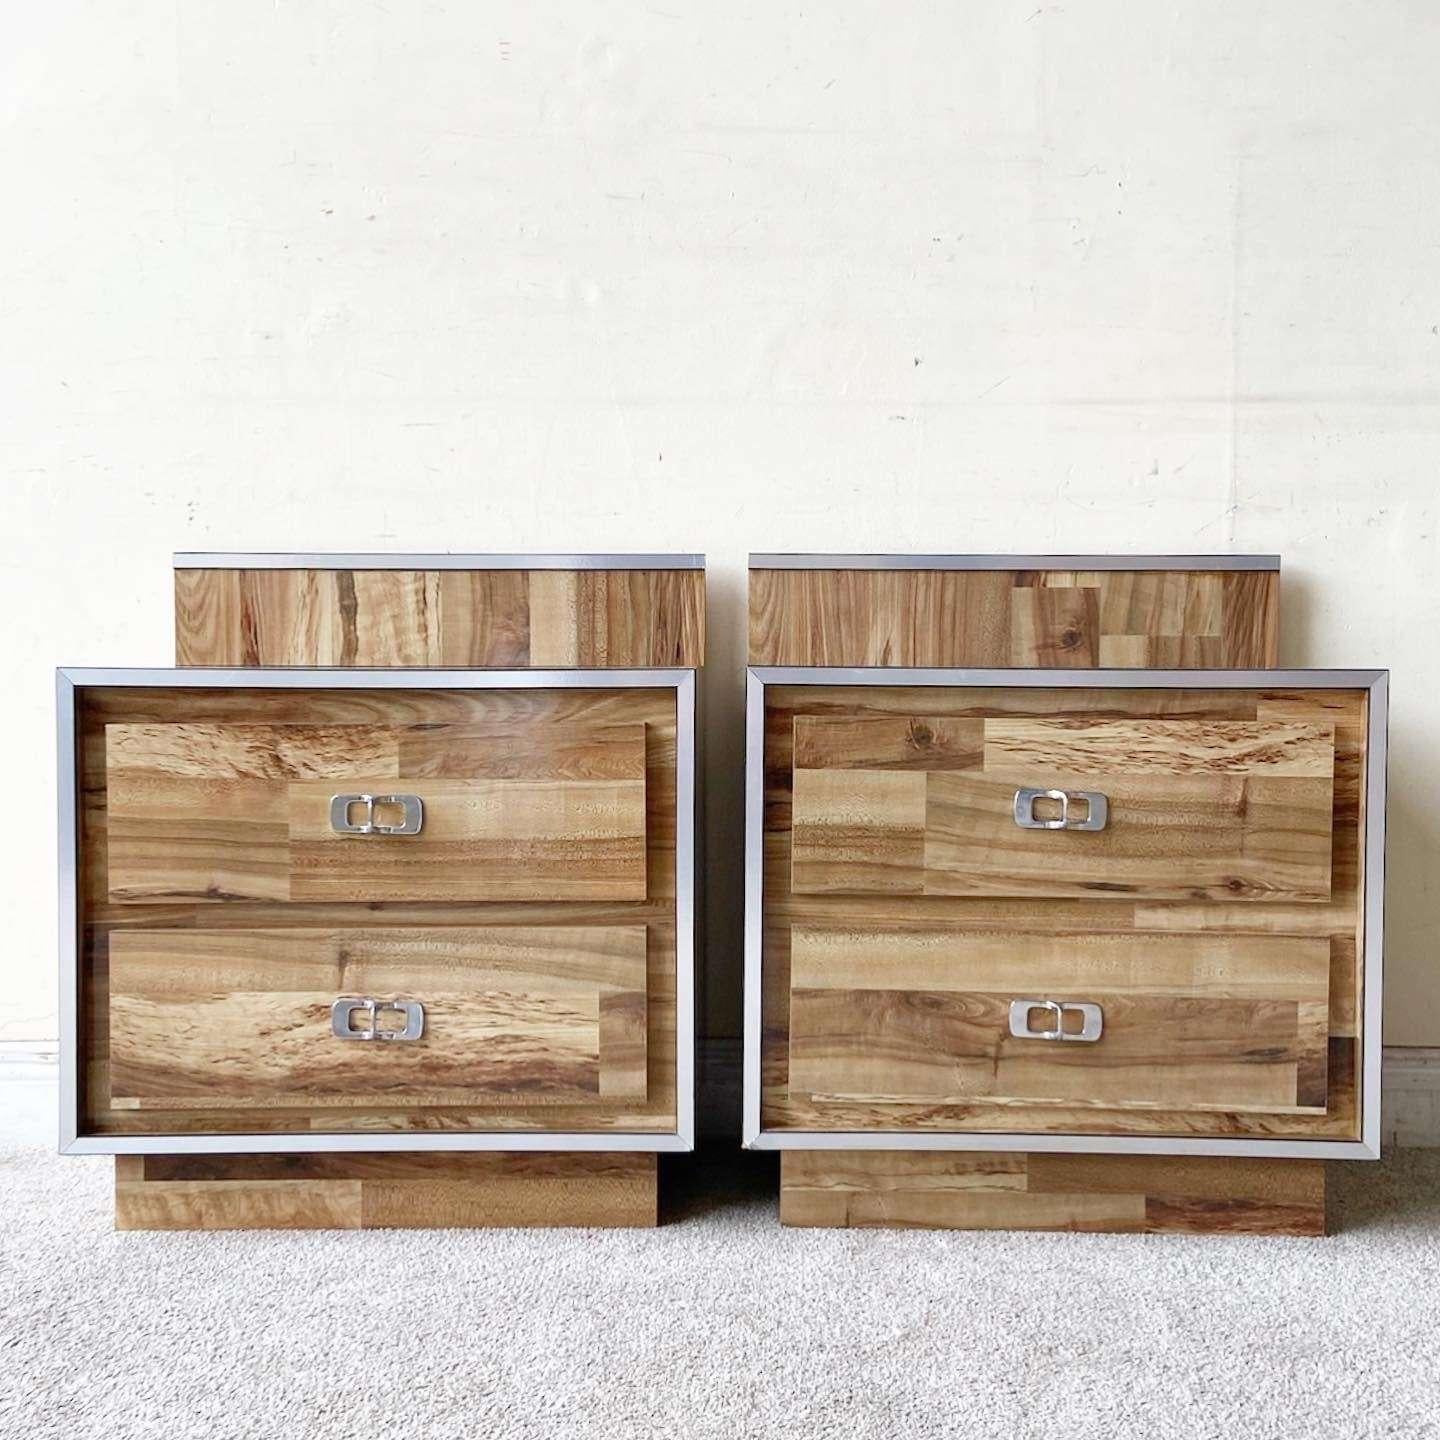 Late 20th Century Postmodern Wood Grain Laminate Queen Headboard and Nightstands - 3 Pieces For Sale